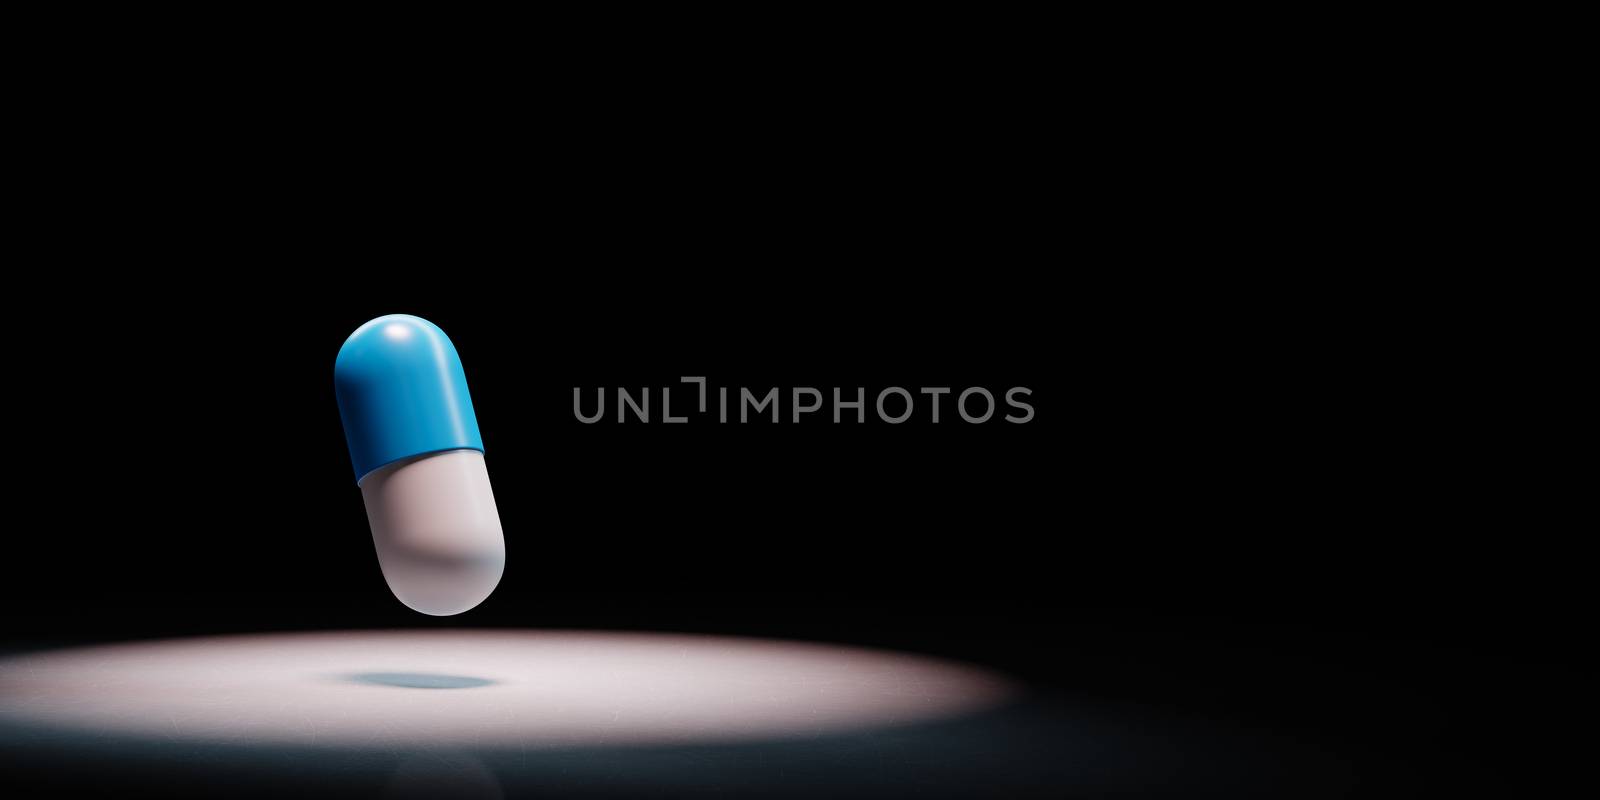 Pill Spotlighted on Black Background by make